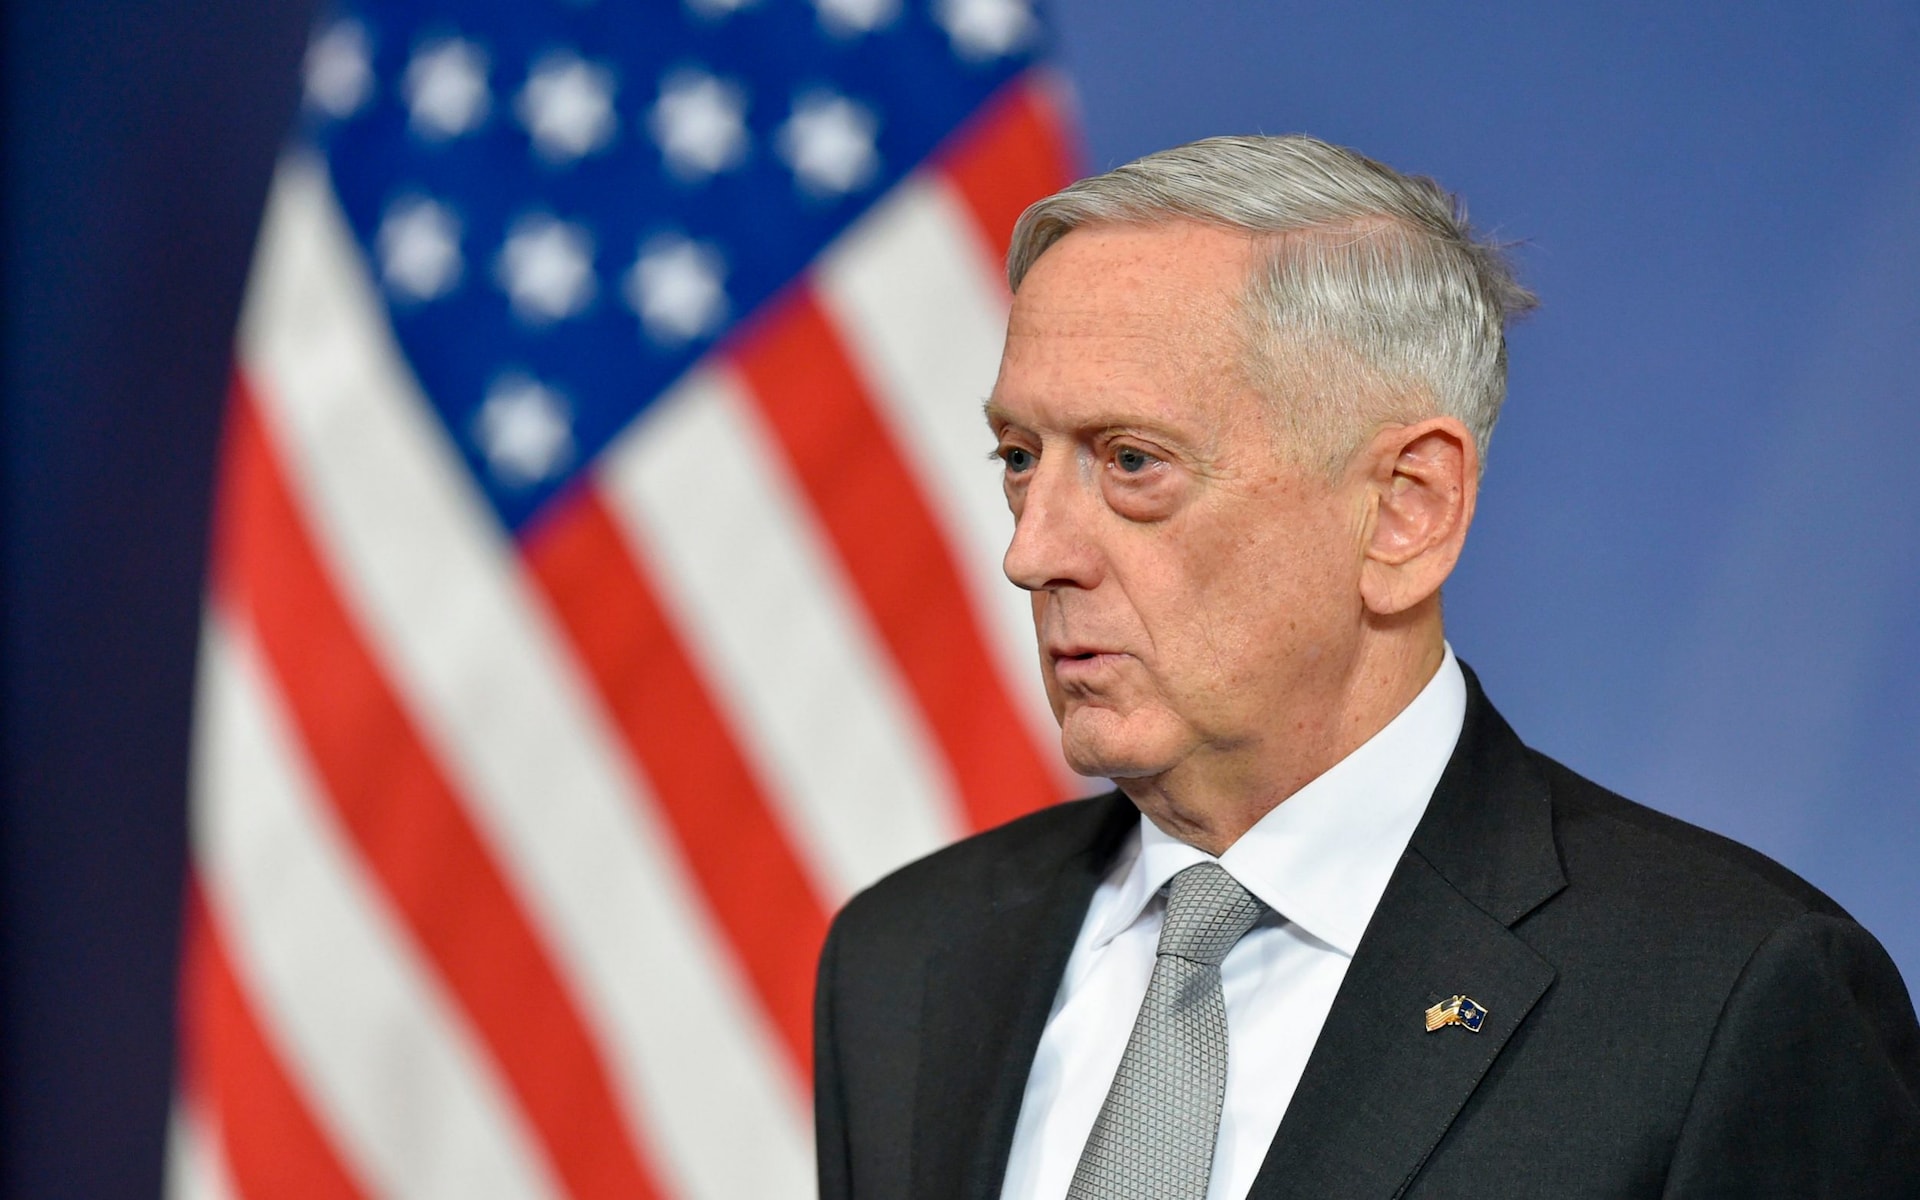 Donald Trump suggests Mad Dog James Mattis could soon leave post